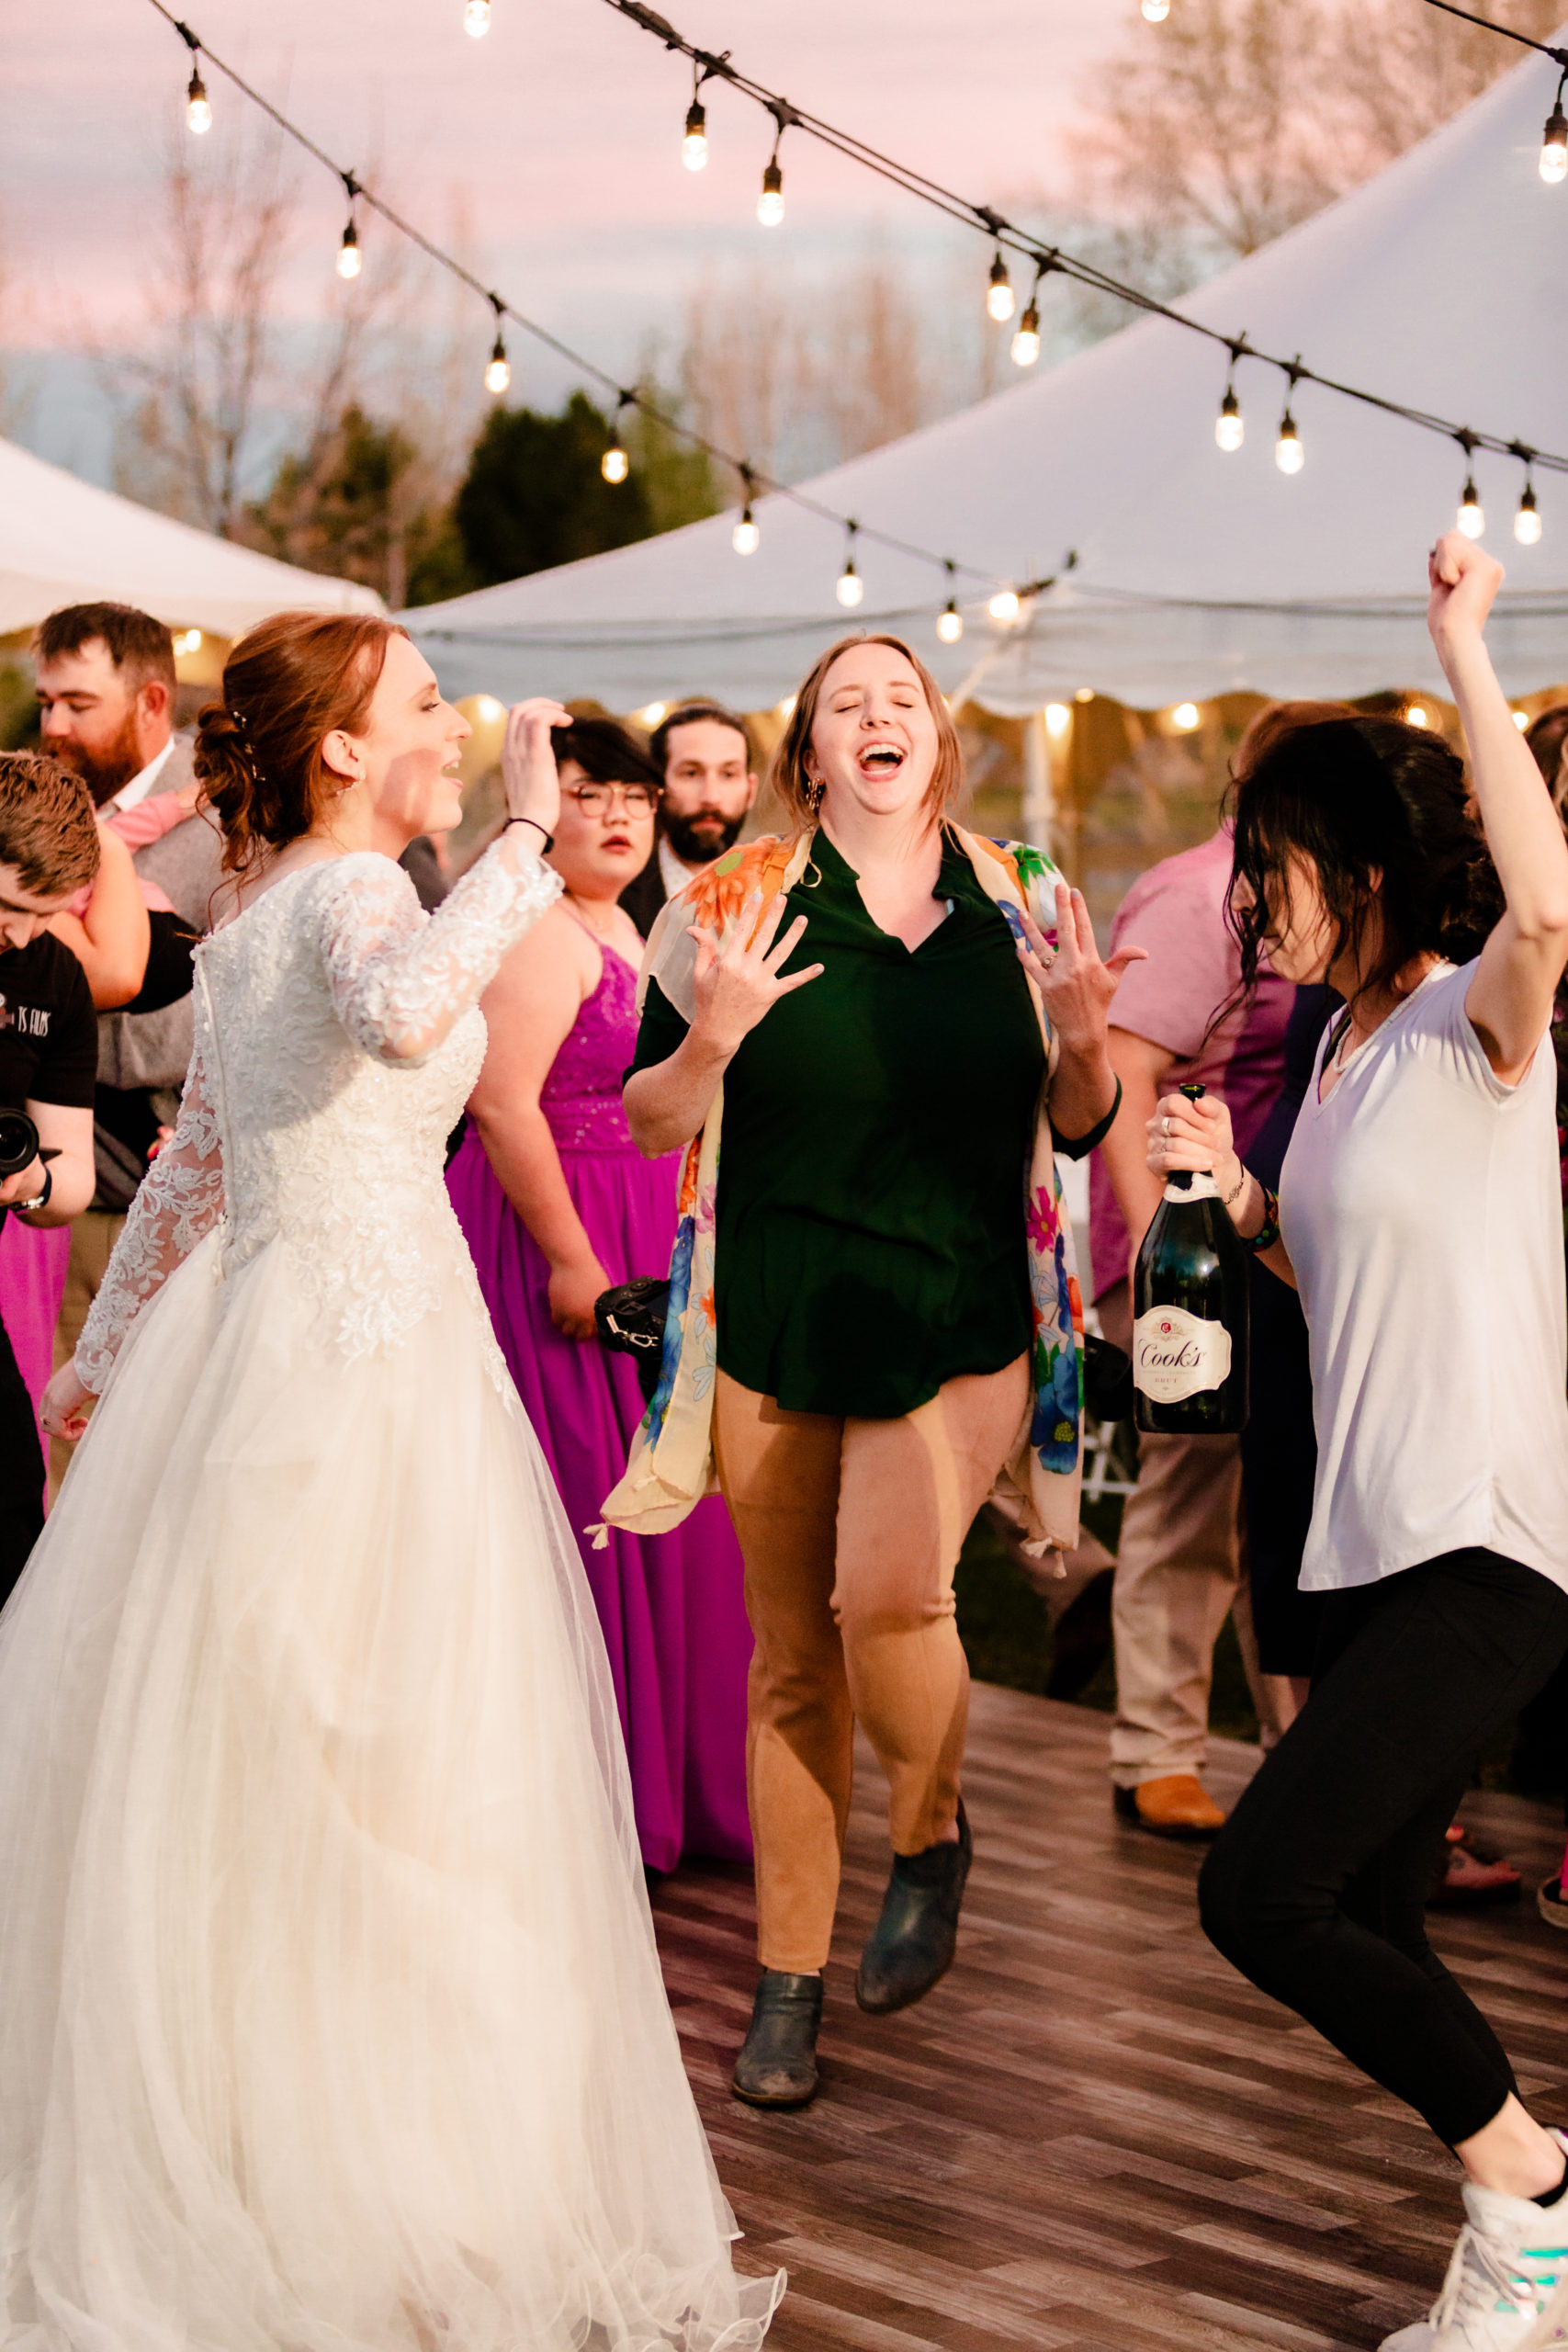 wedding photographer jumping with wedding guests during sunset reception